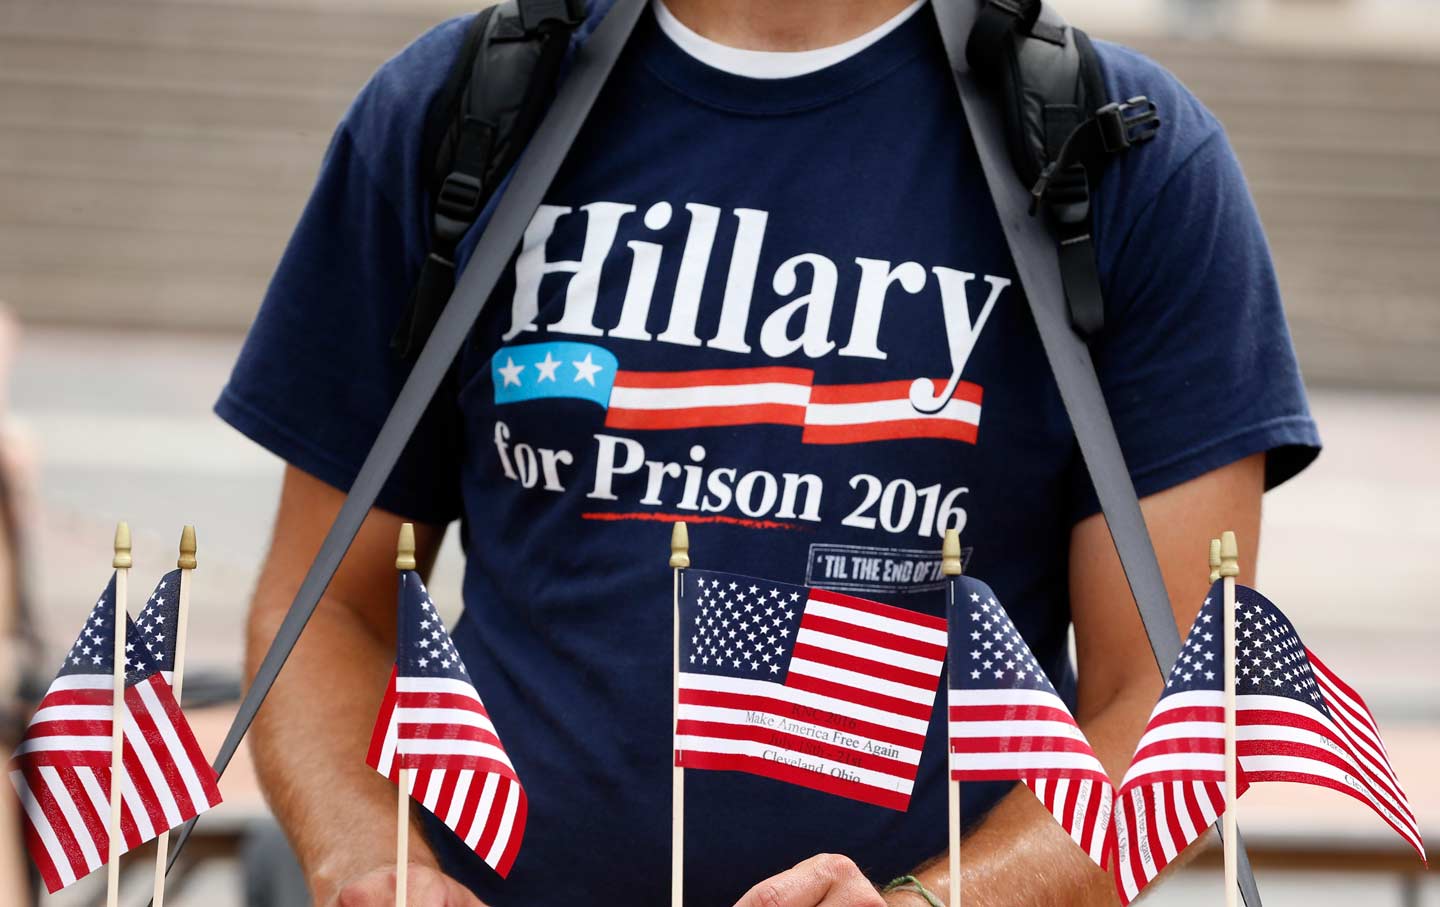 Hillary for Prison RNC T-Shirt